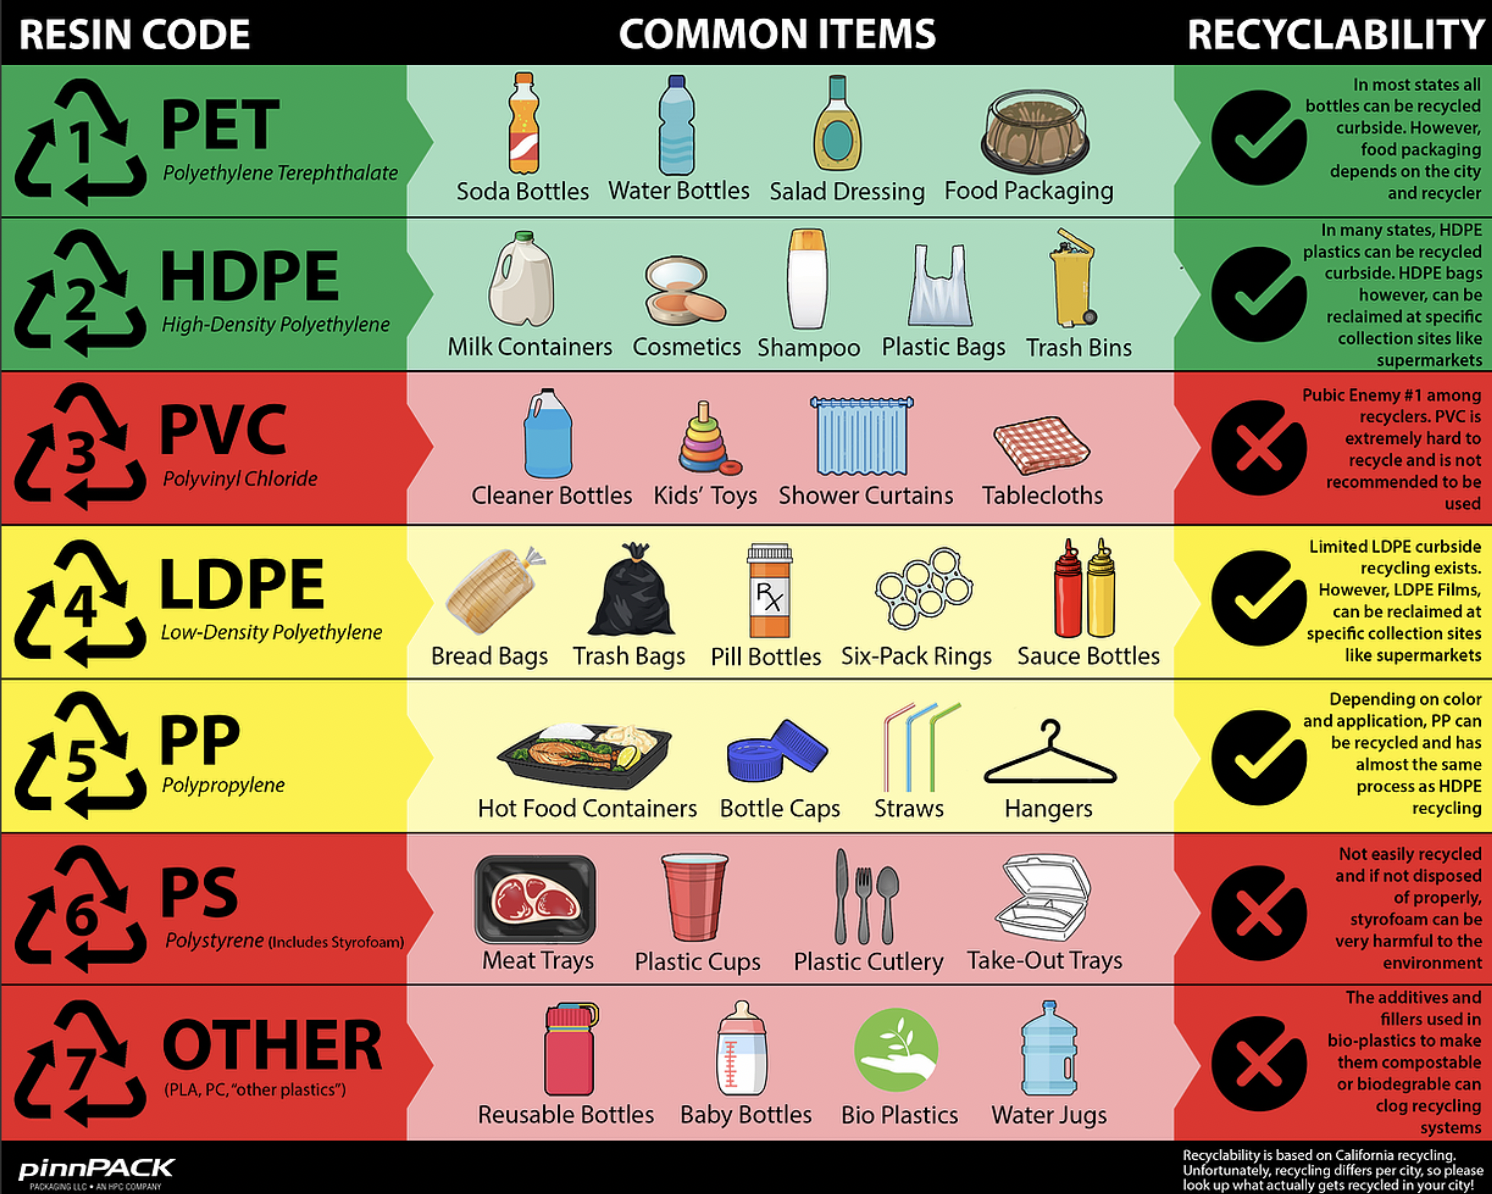 Why Should All Plastic Film Producers Recycle?